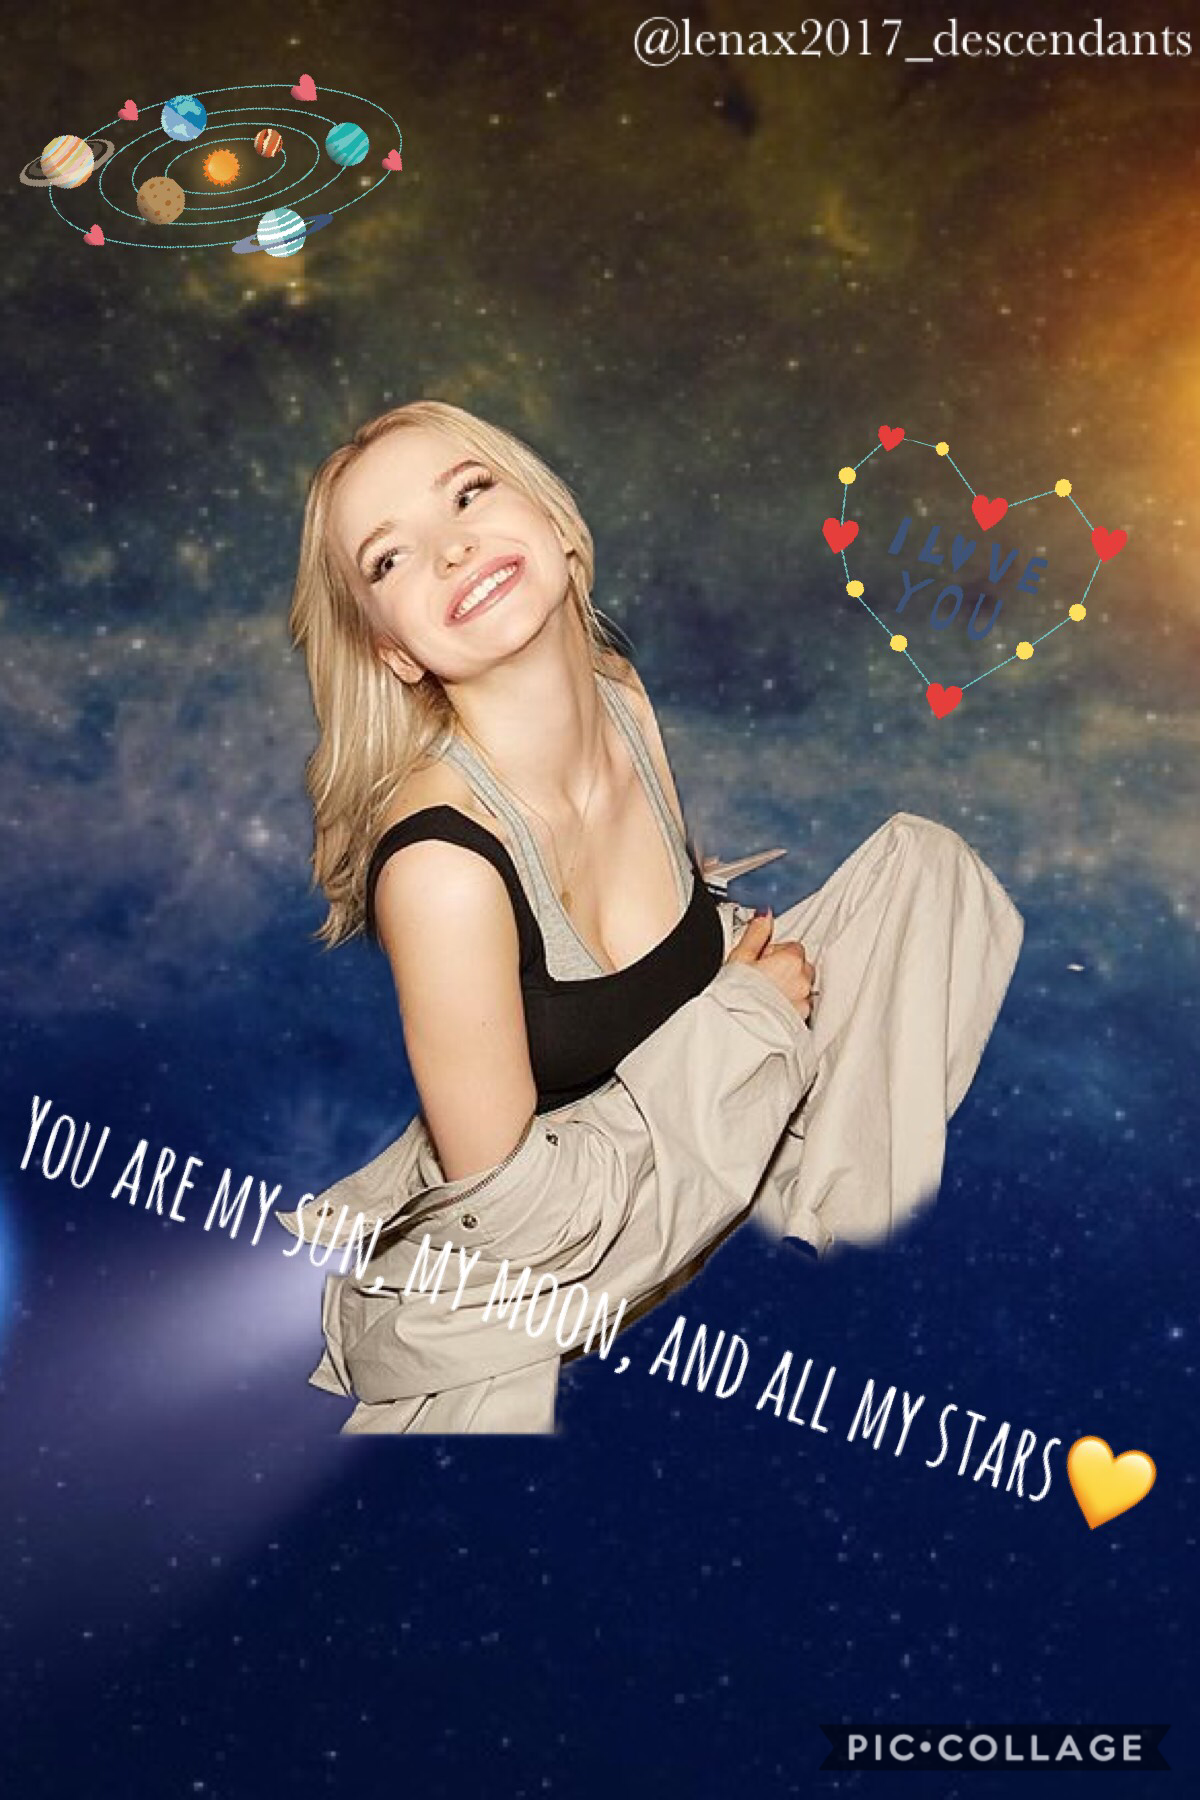 I’ve changed my name so i had to upload an actual picture... THIS IS MY EVERYTHING😍😍❤️ Dove Cameron😍 #DoveCameron💗